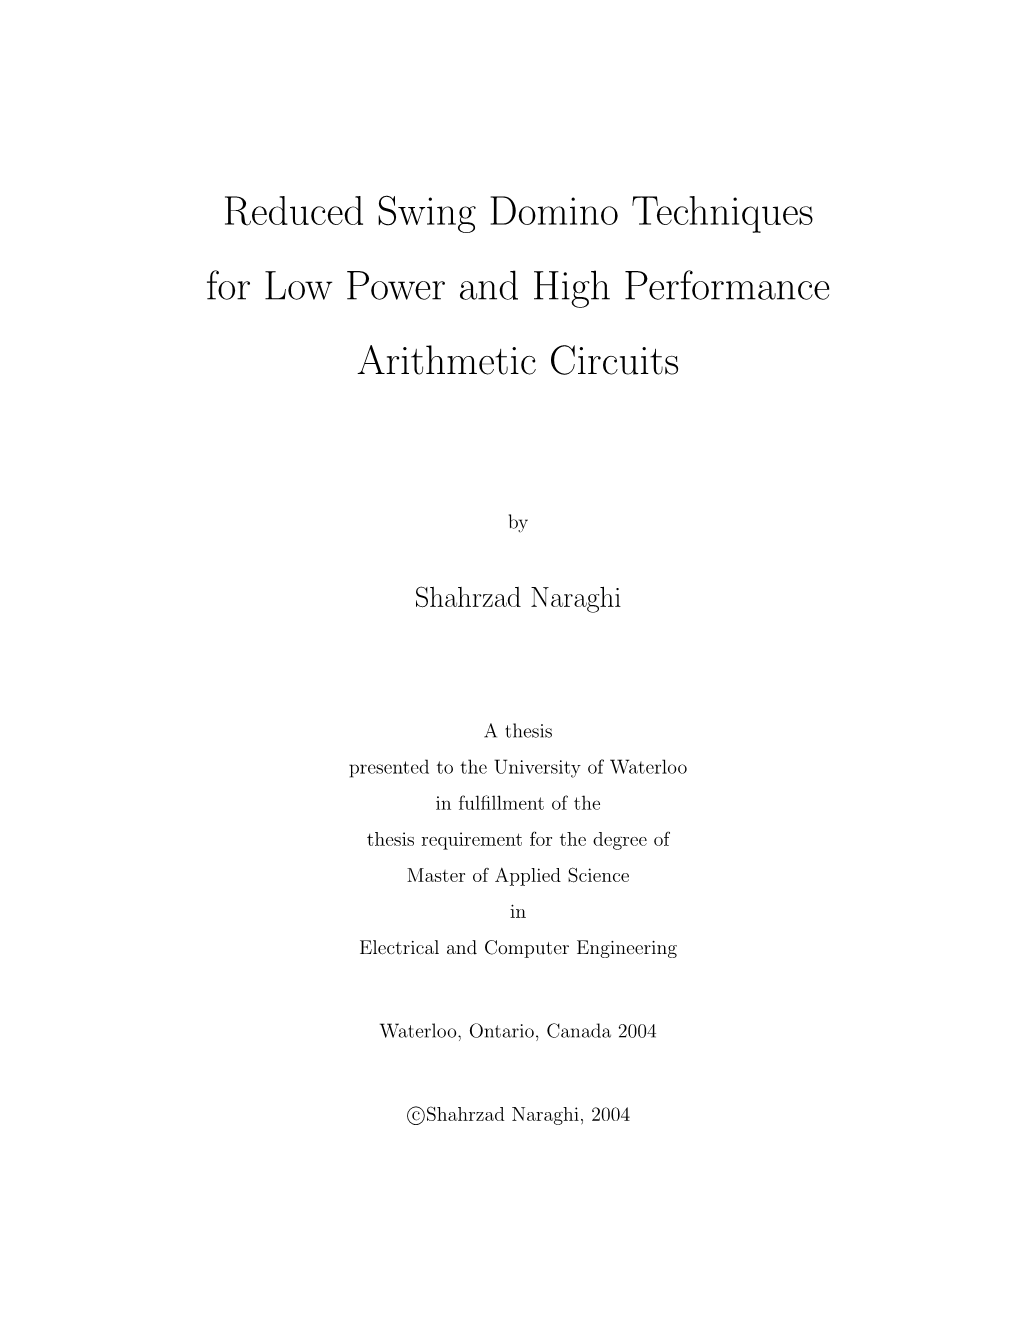 Reduced Swing Domino Techniques for Low Power and High Performance Arithmetic Circuits